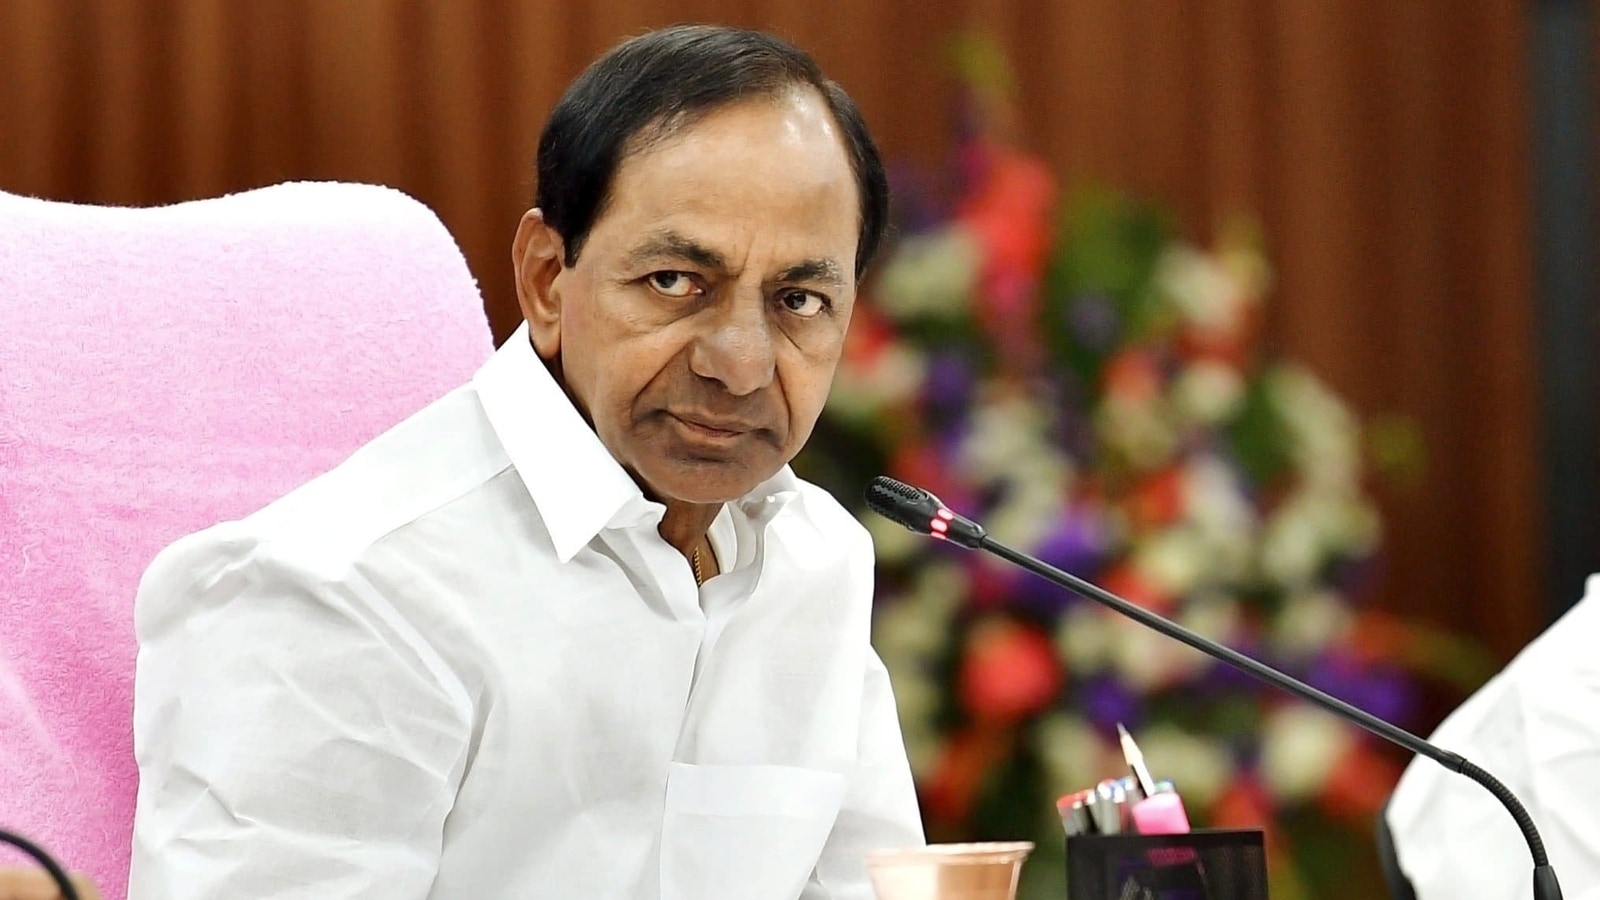 Evening brief: KCR's office says he's unwell as Telangana CM skips PM Modi  event | Latest News India - Hindustan Times